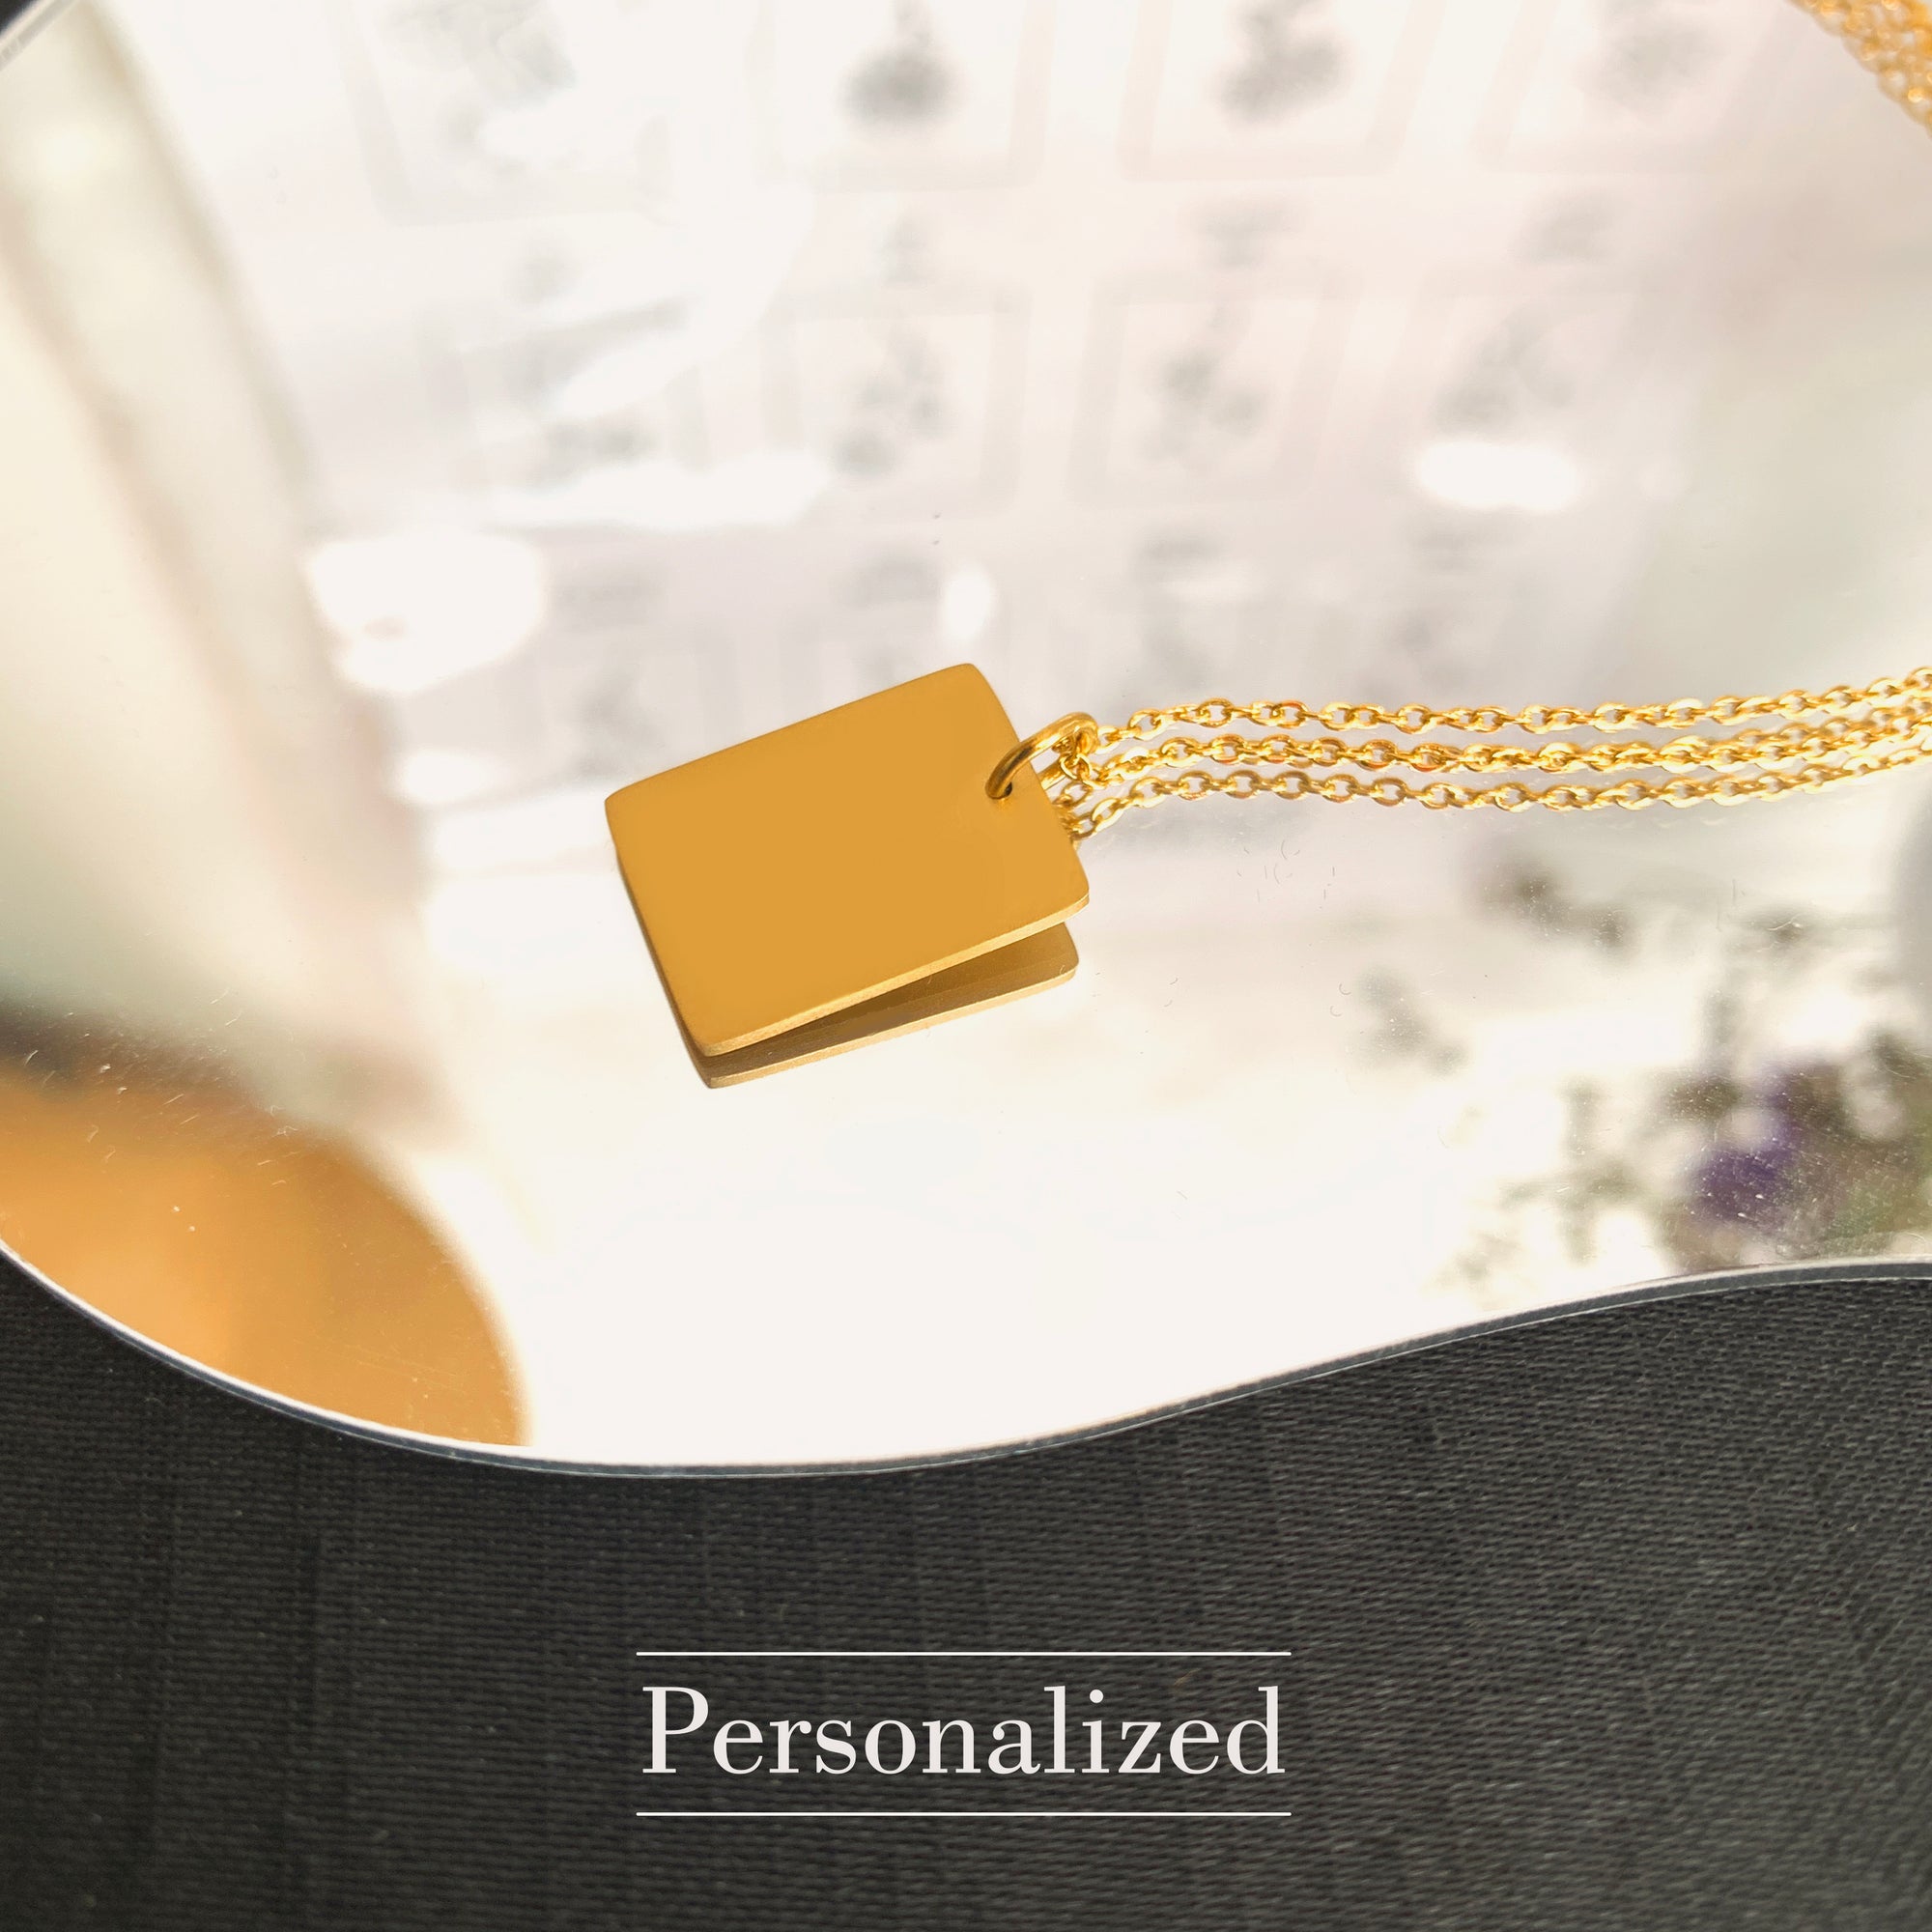 Personalized Rectangular Tag Necklace - Custom Engraved Jewelry for Men & Women